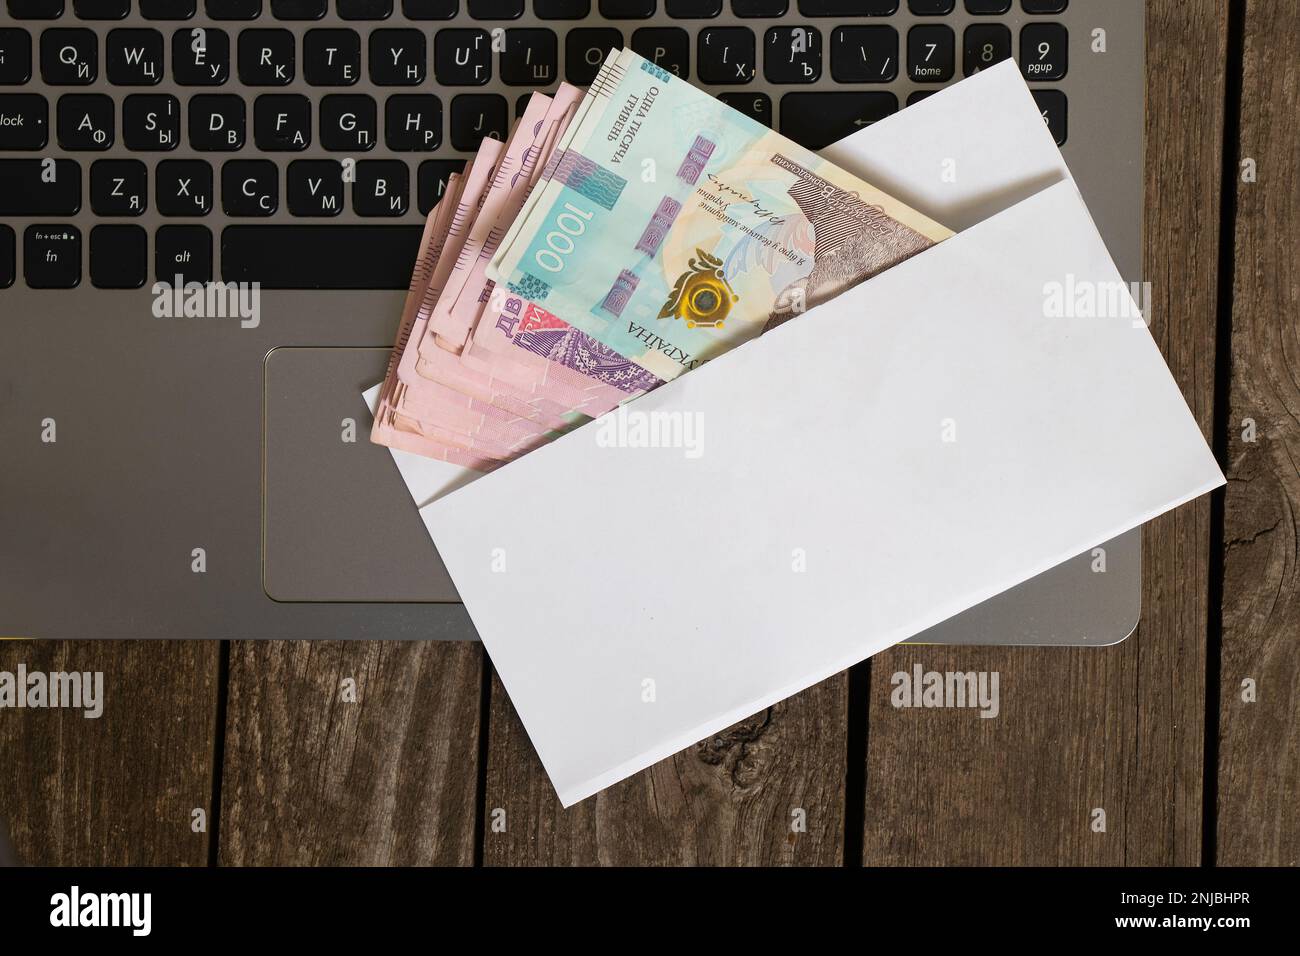 Ukrainian cash currency lies in a white envelope on a laptop on an wooden envelope, salary in an envelope Stock Photo